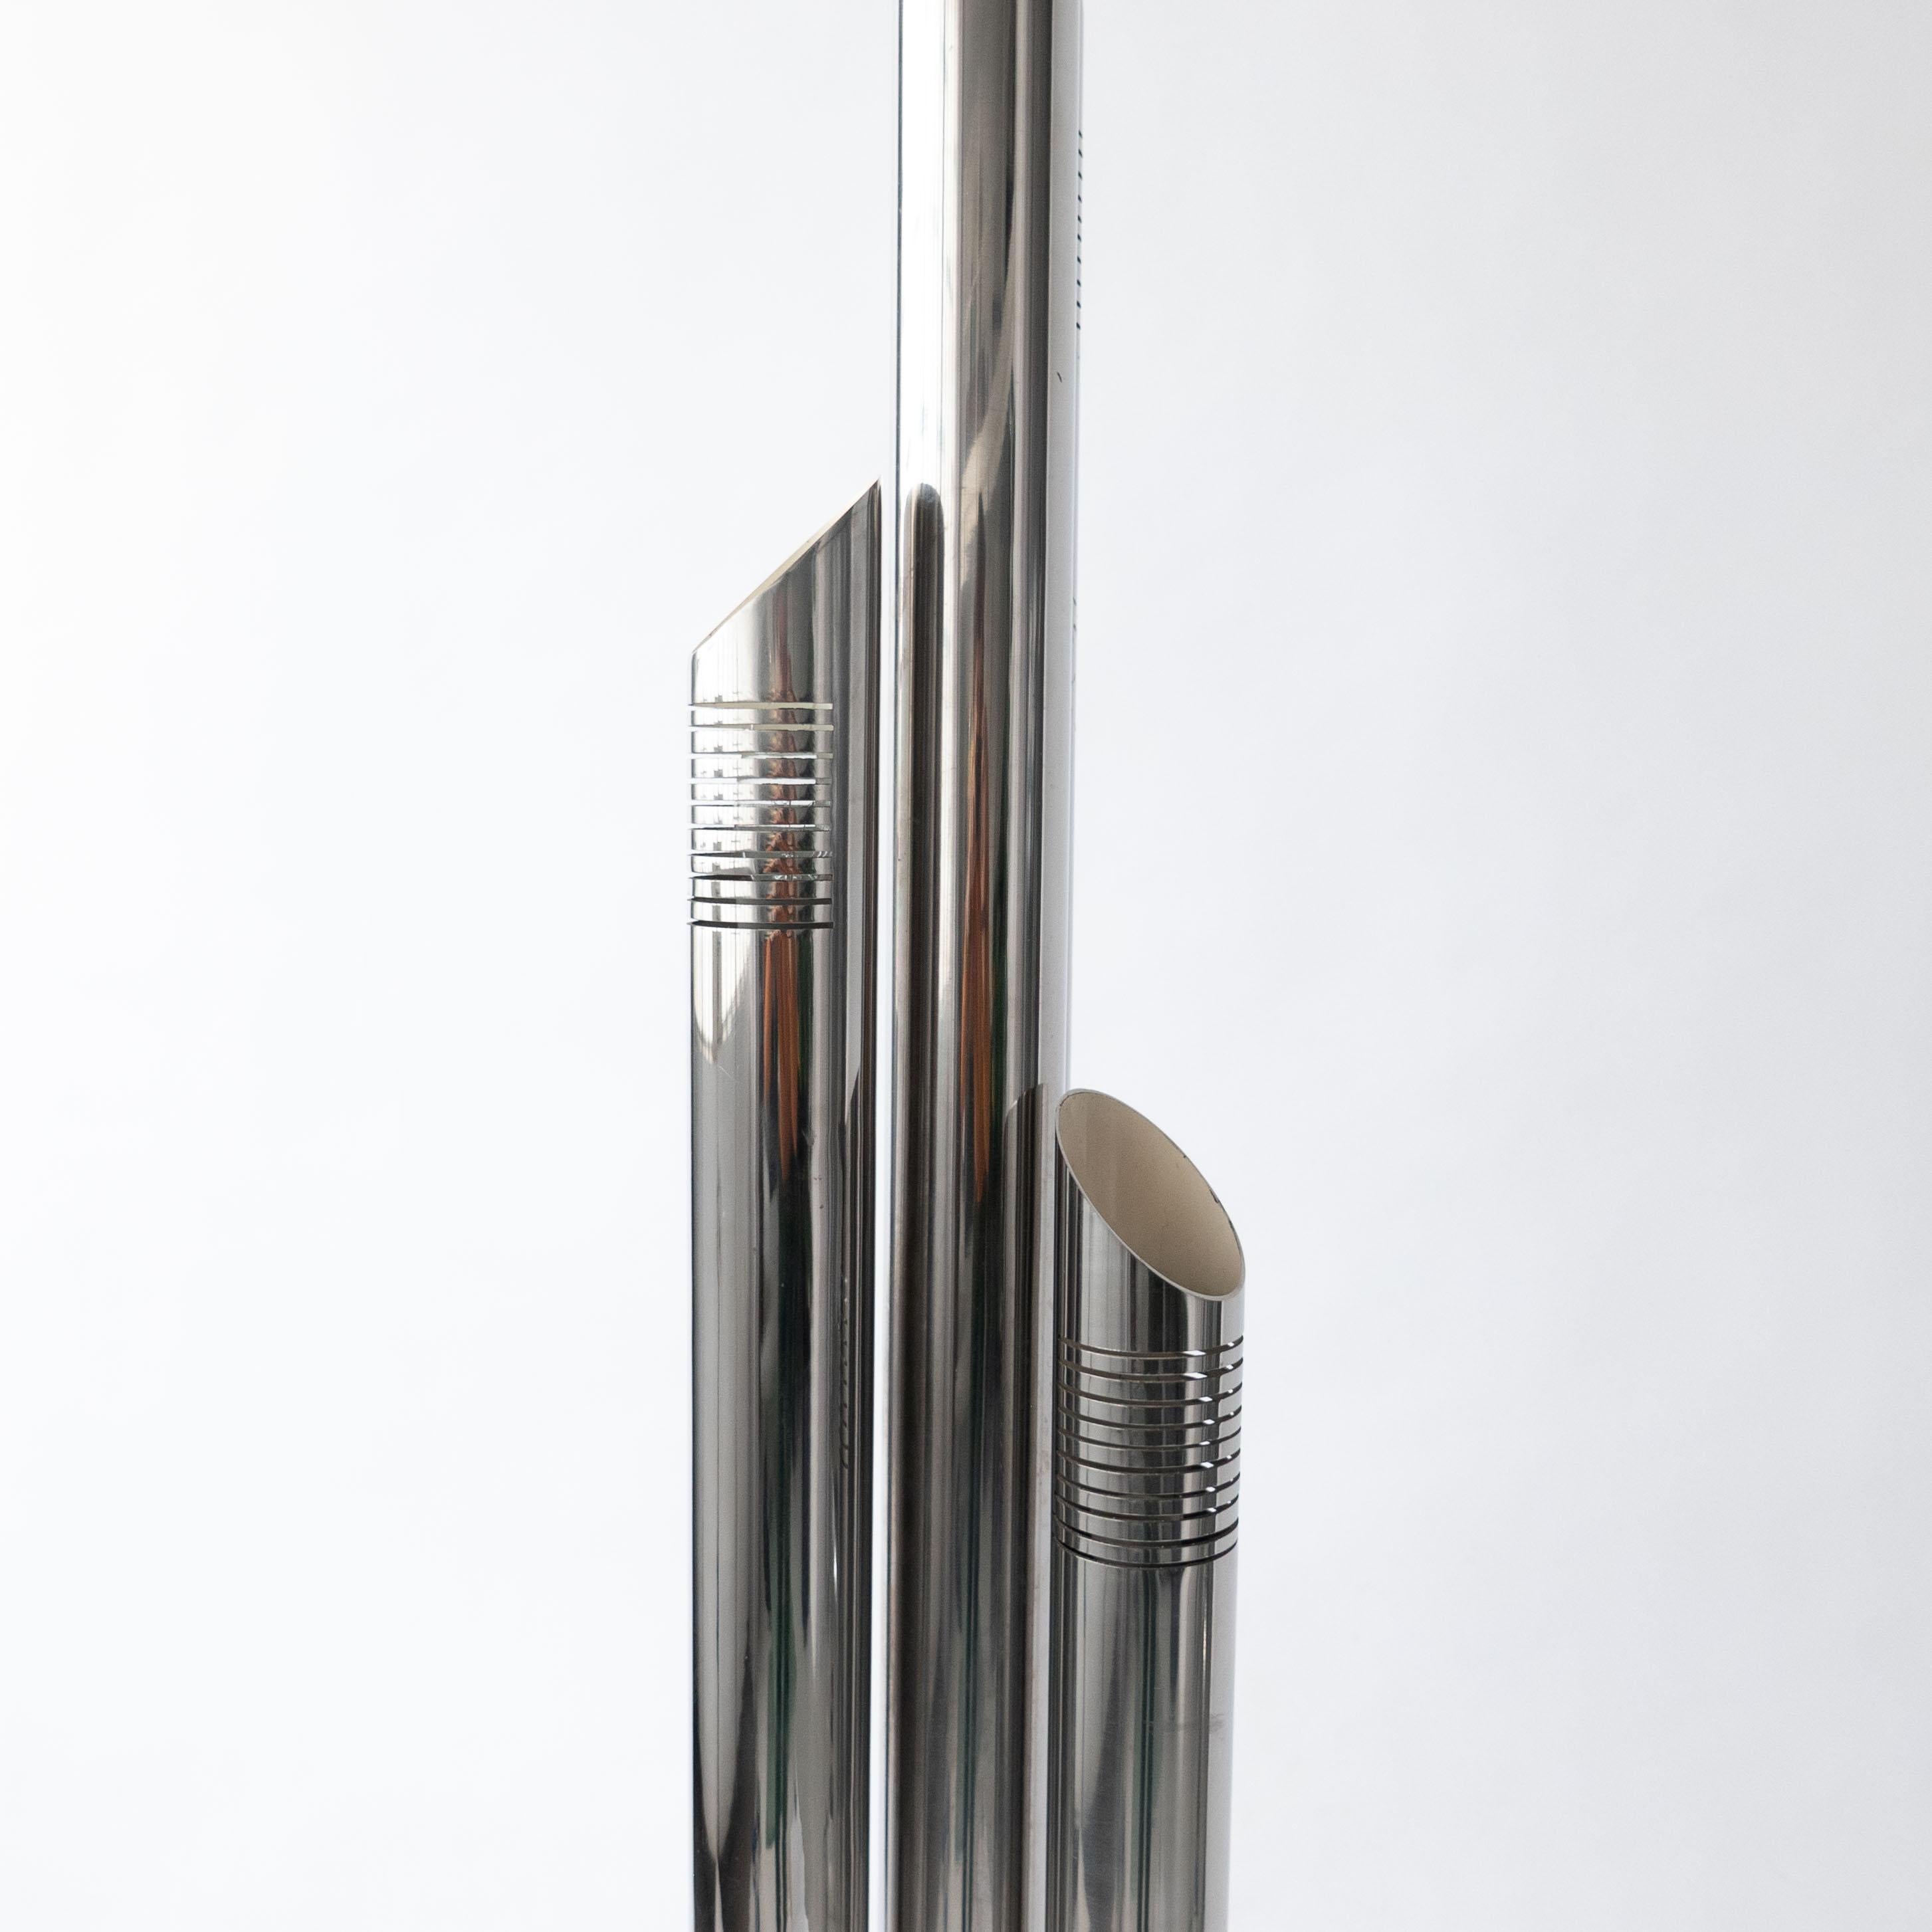 Late 20th Century Sculptural Chromed Floor Lamp by Goffredo Reggiani, Italian Collectible Design For Sale